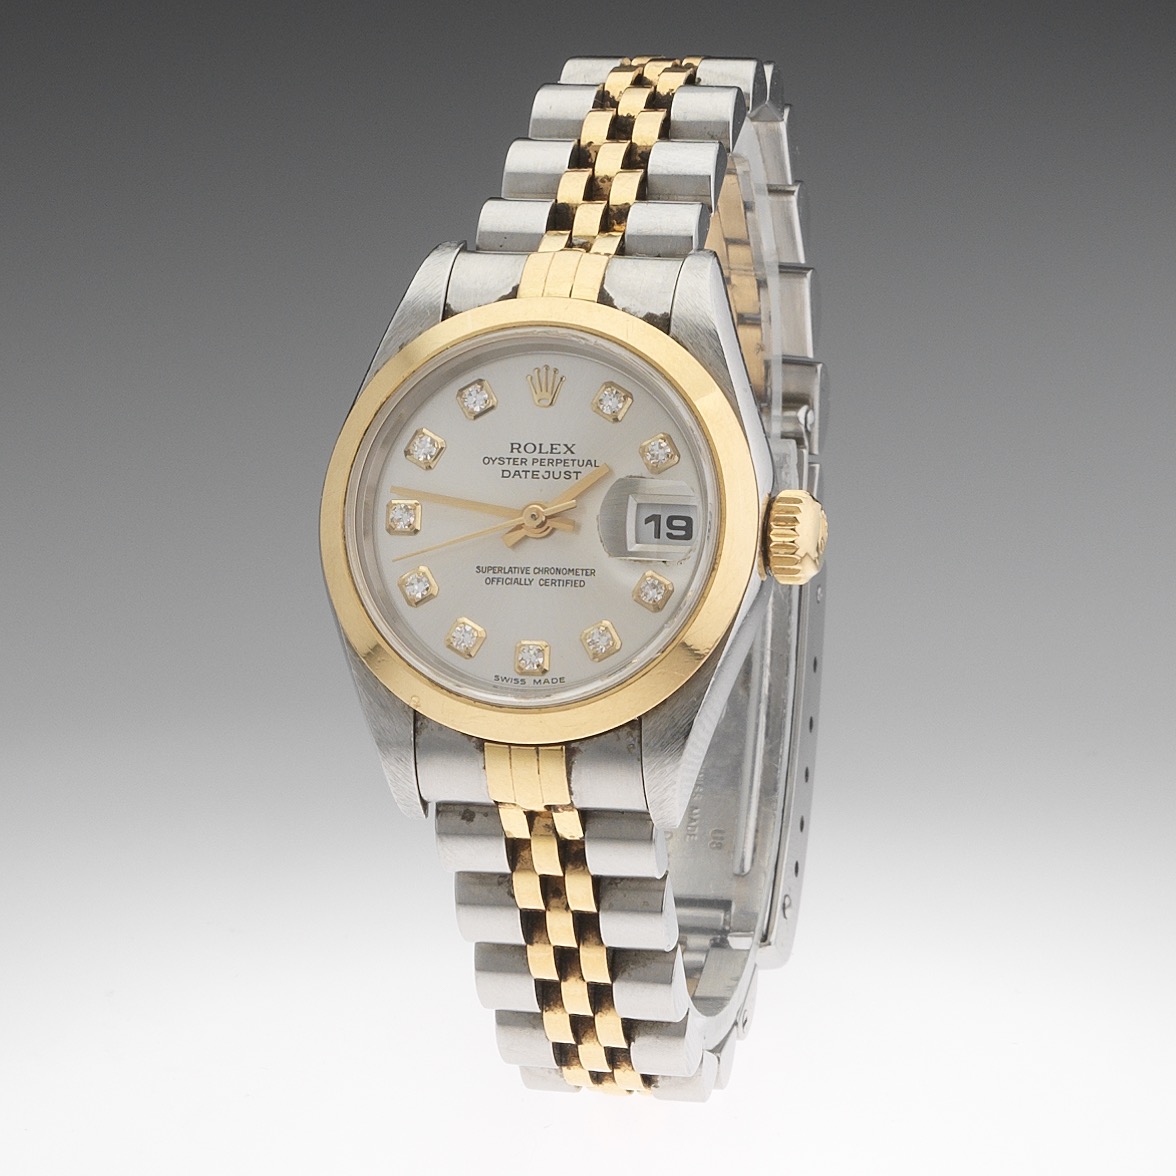 18k rolex oyster perpetual datejust with diamonds